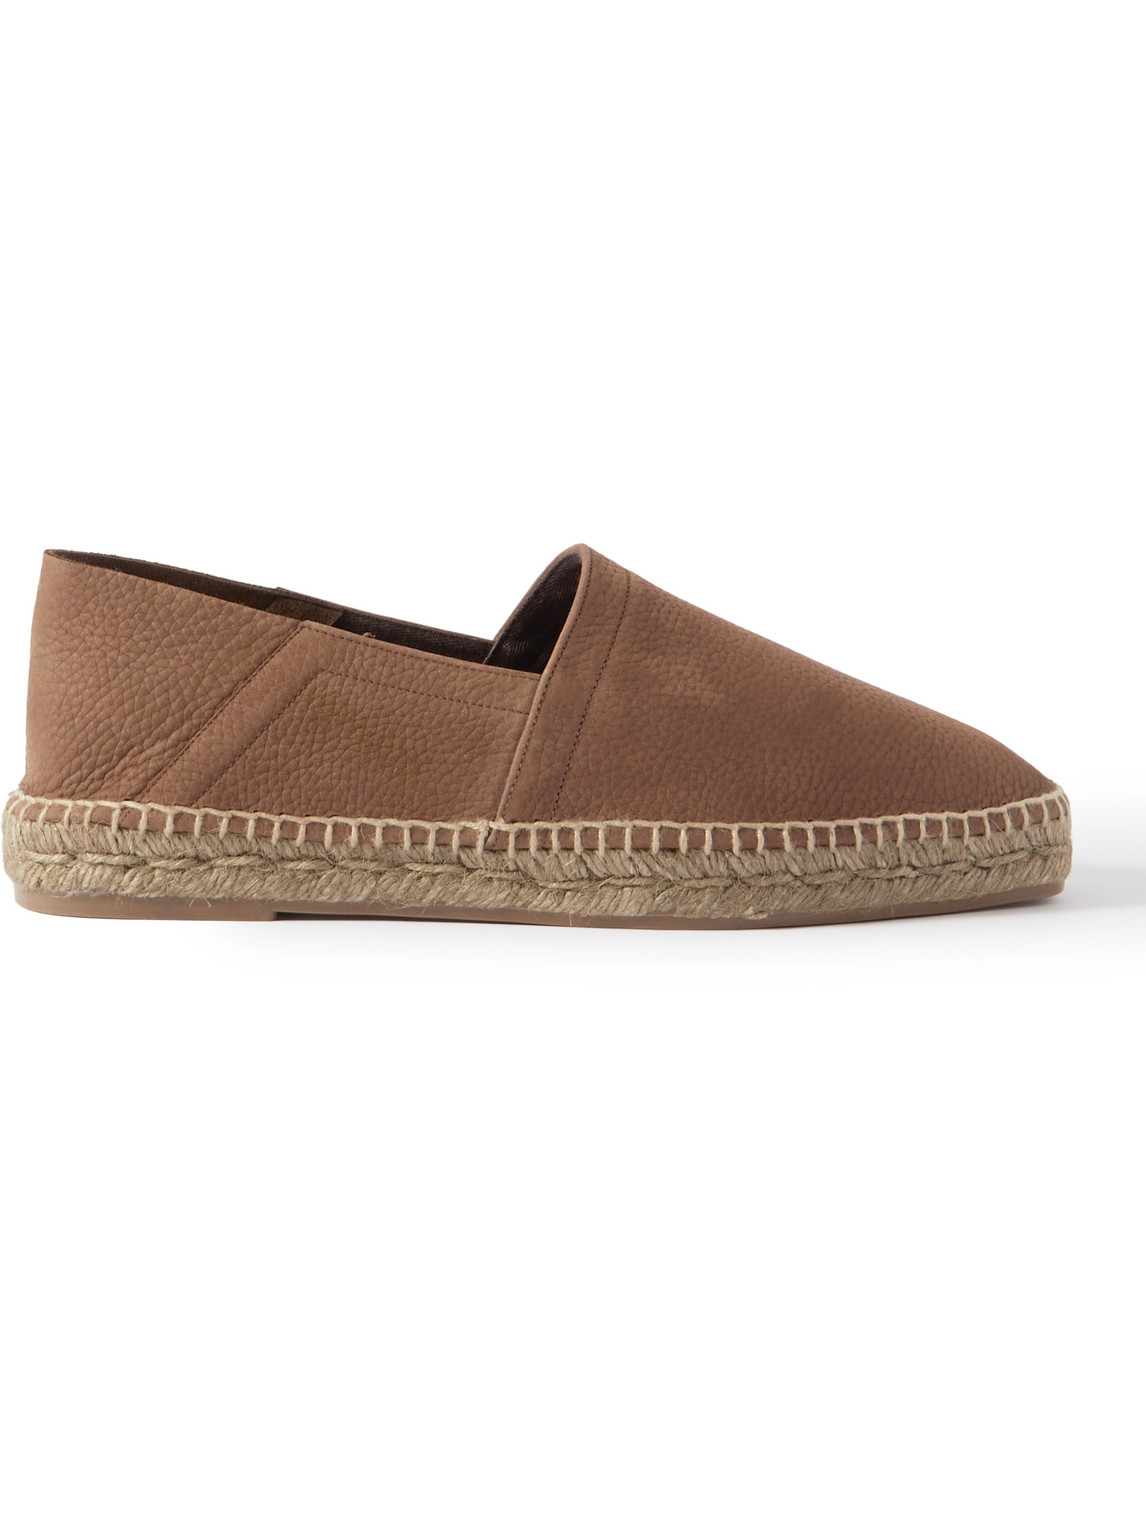 Tom Ford Barnes Textured-leather Espadrilles In Brown